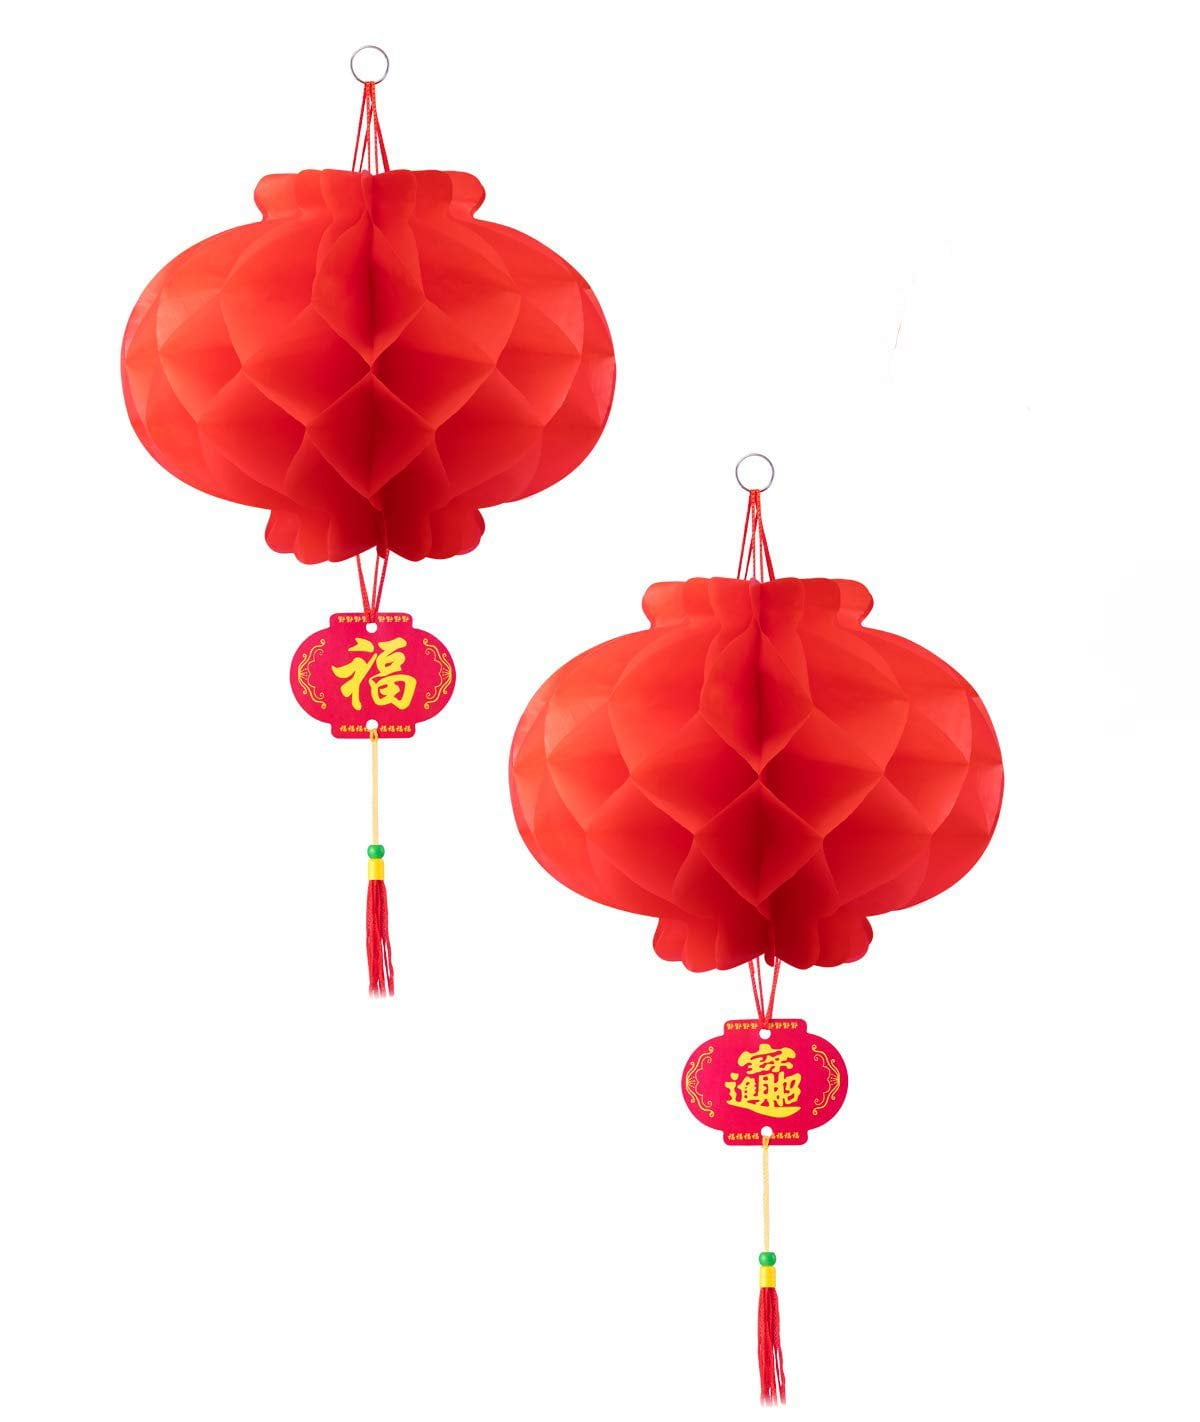 10x Red Honeycomb Paper Lanterns Chinese Character "Fu" Wedding Party Decor Home